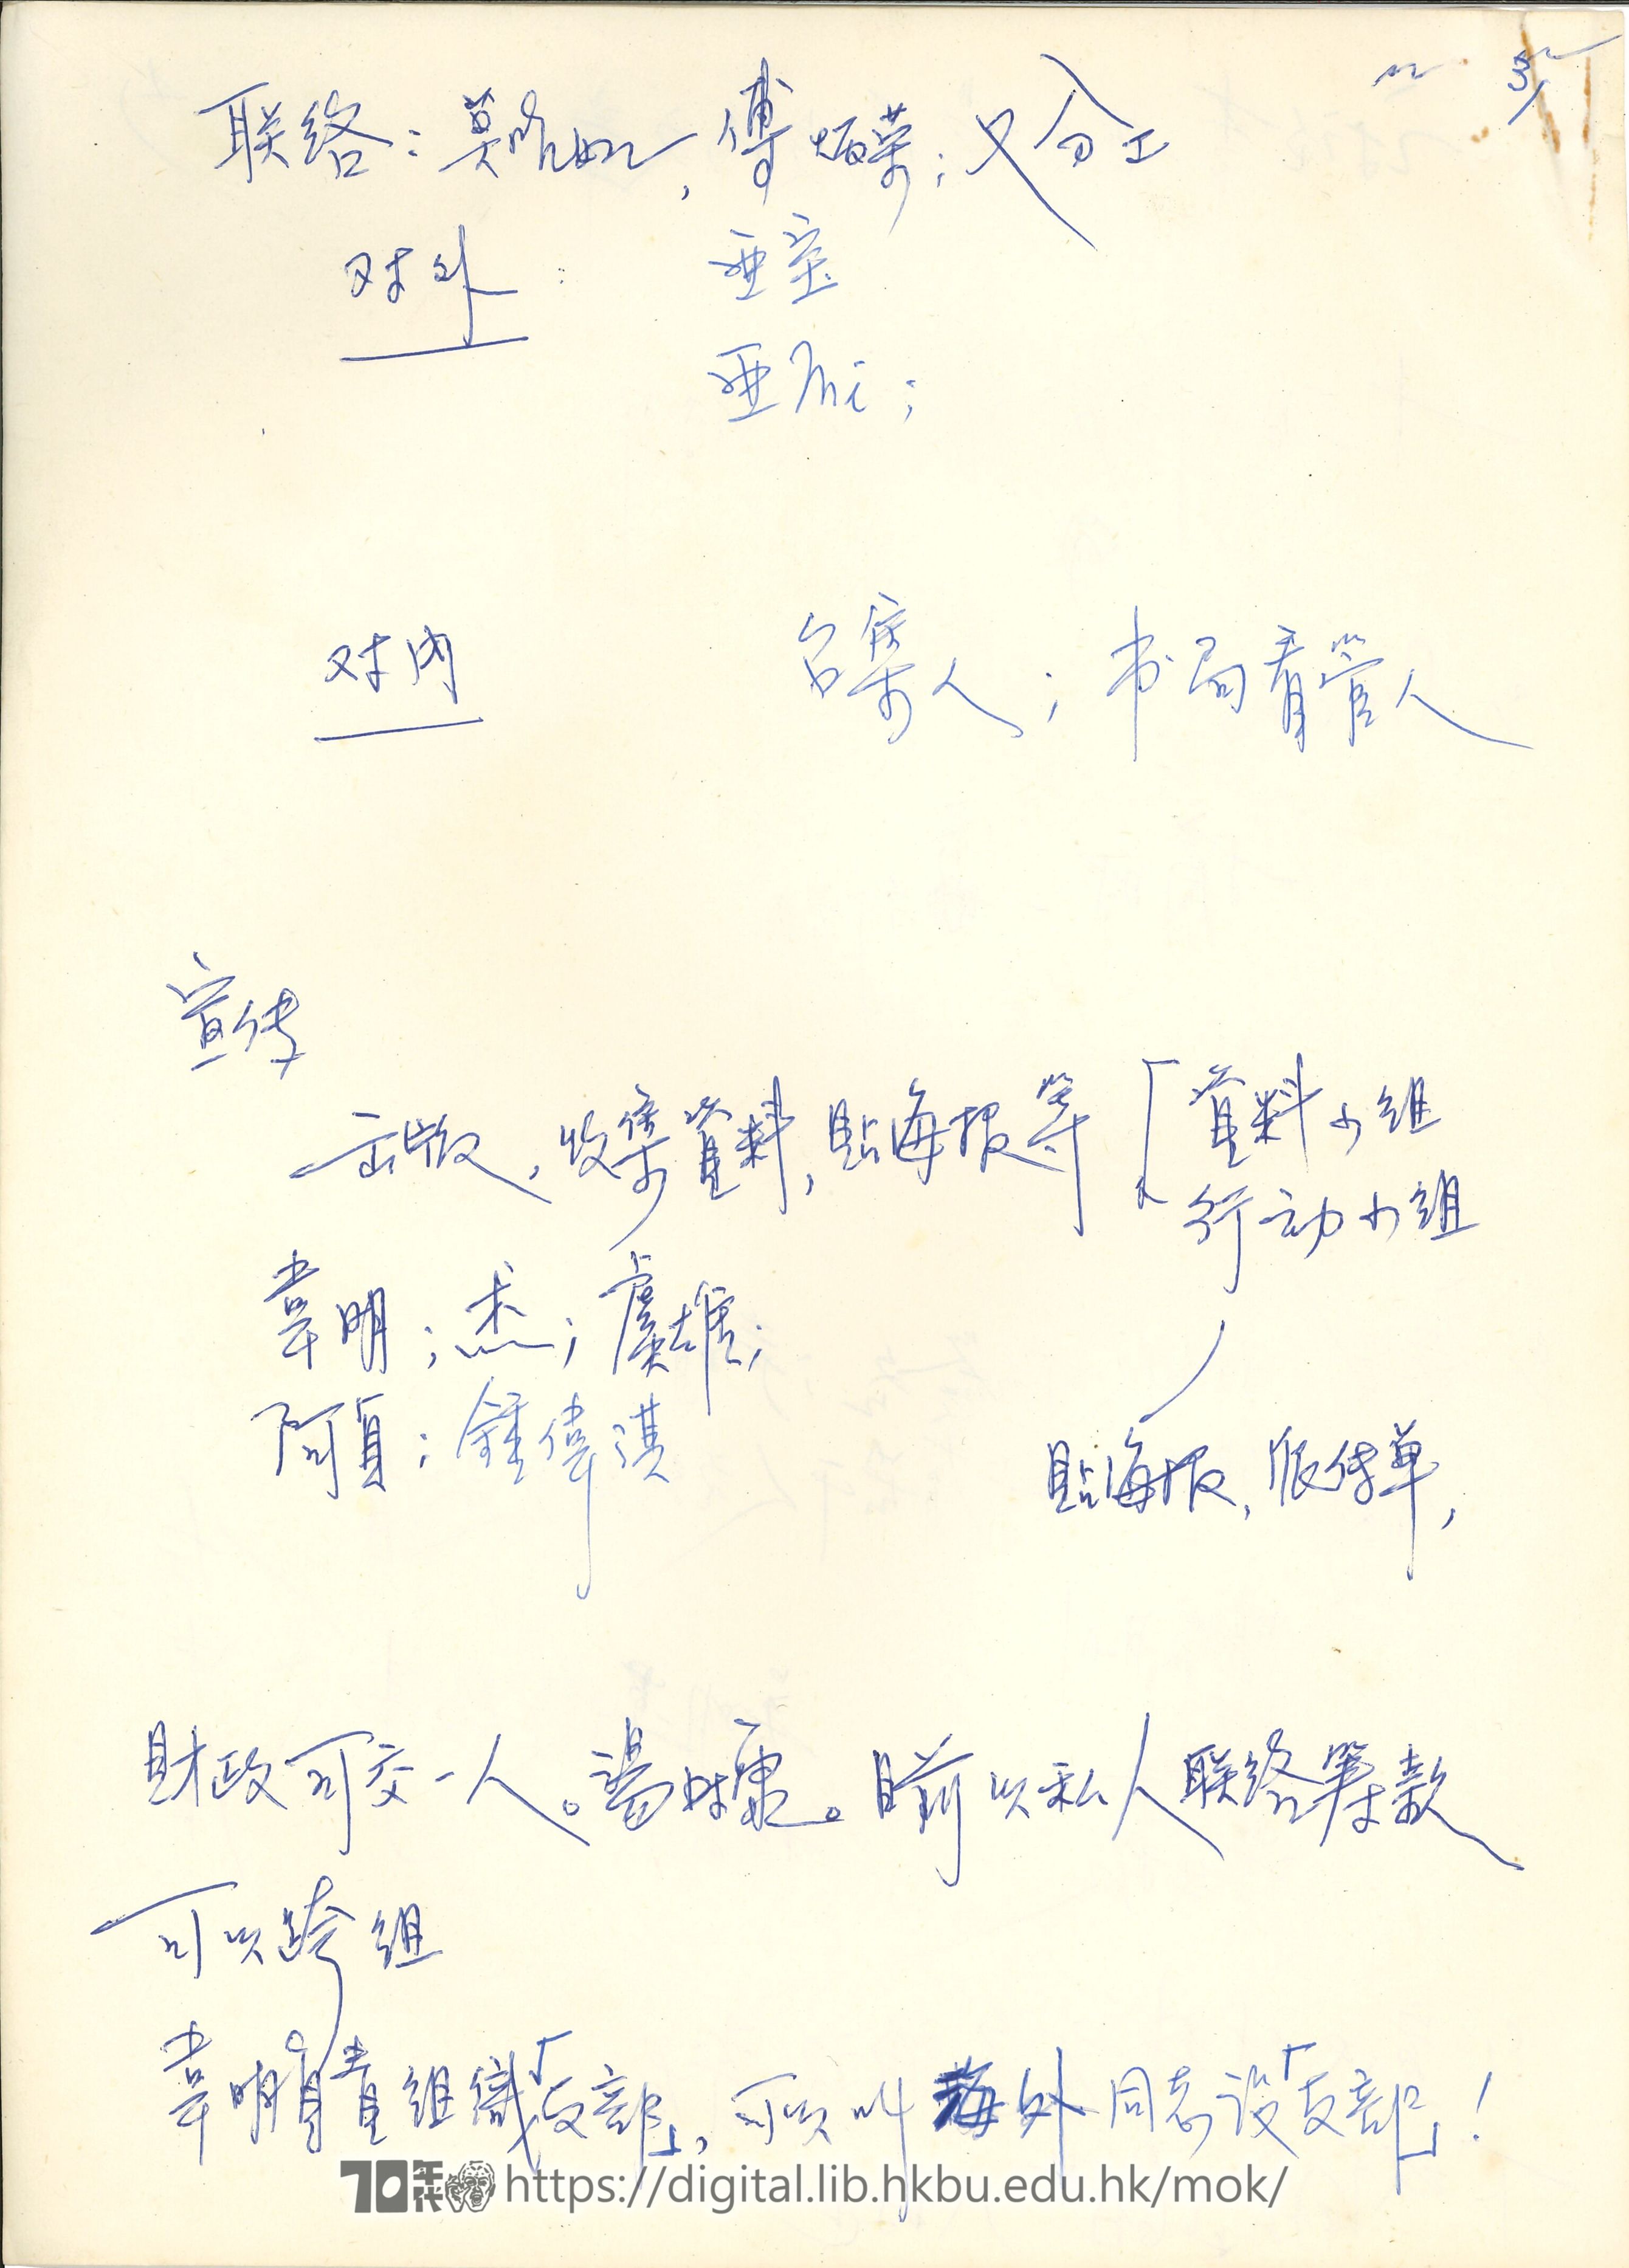   Record of Free Li & Yang Action Committee meeting  